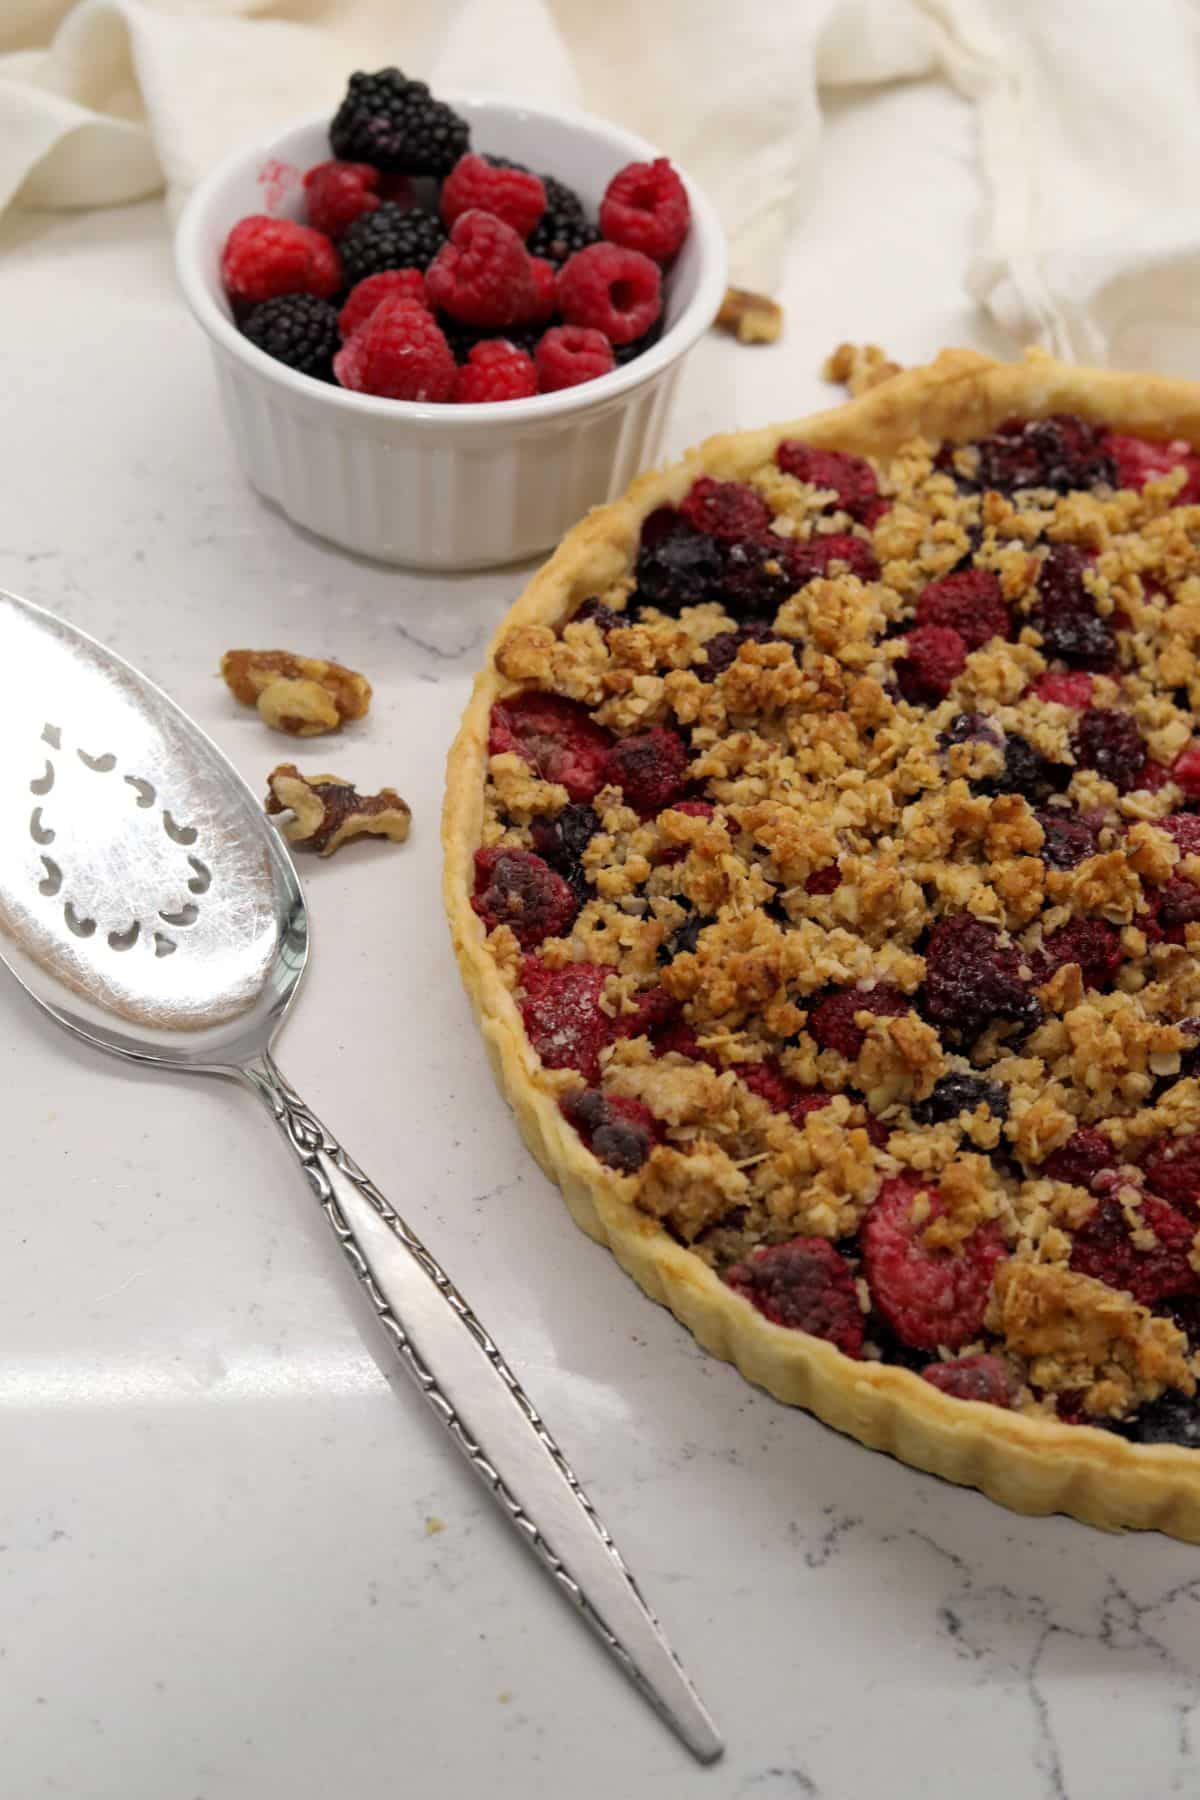 A berry trat with a pie spatula